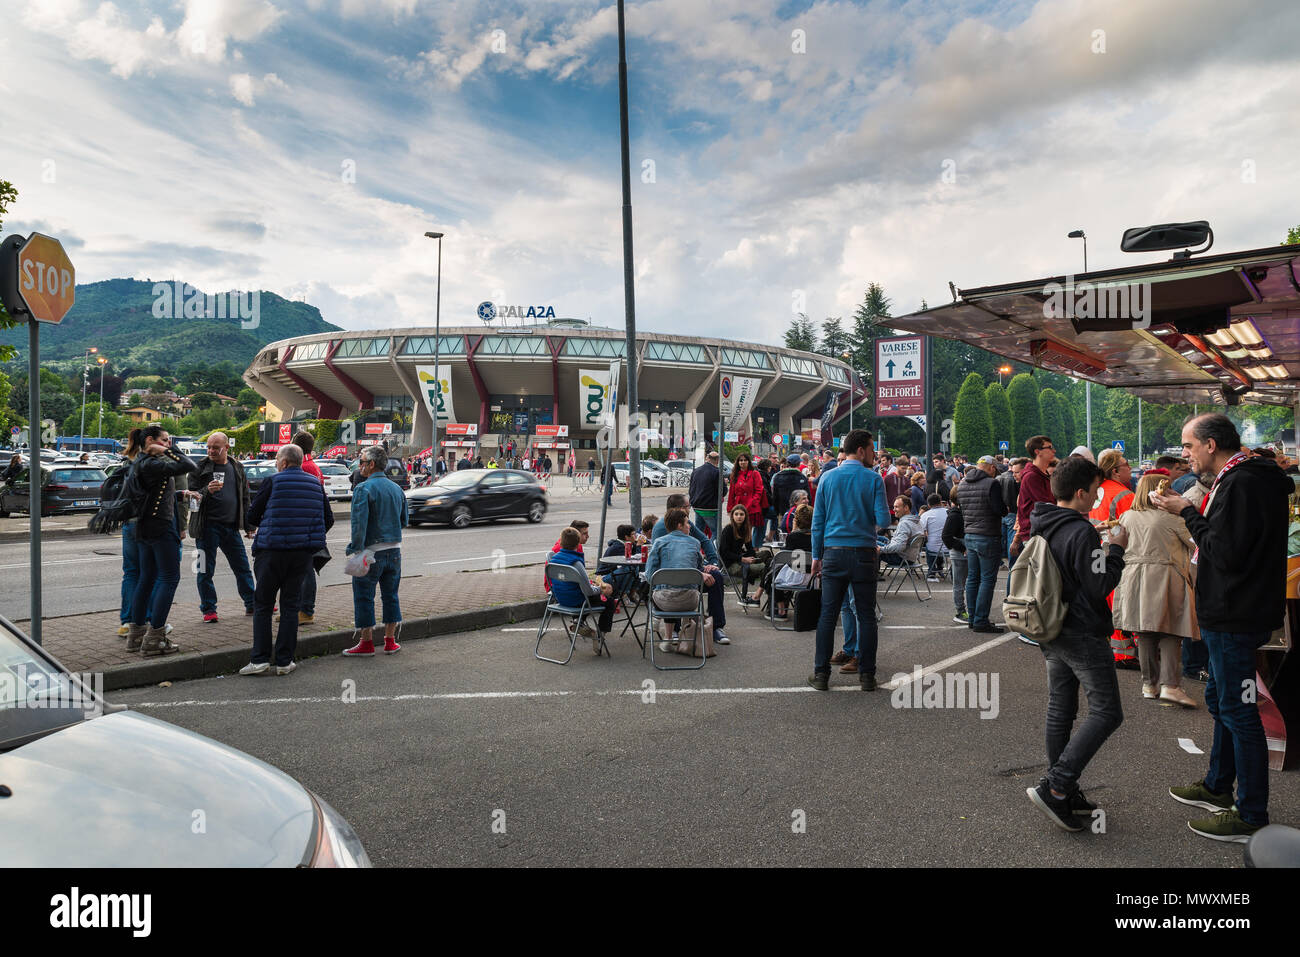 Varese, Italy - May 16, 2018: Area in front of the sports hall, Pala2a, before a match, fans and street vendors. Palace of Varese Basketball Stock Photo